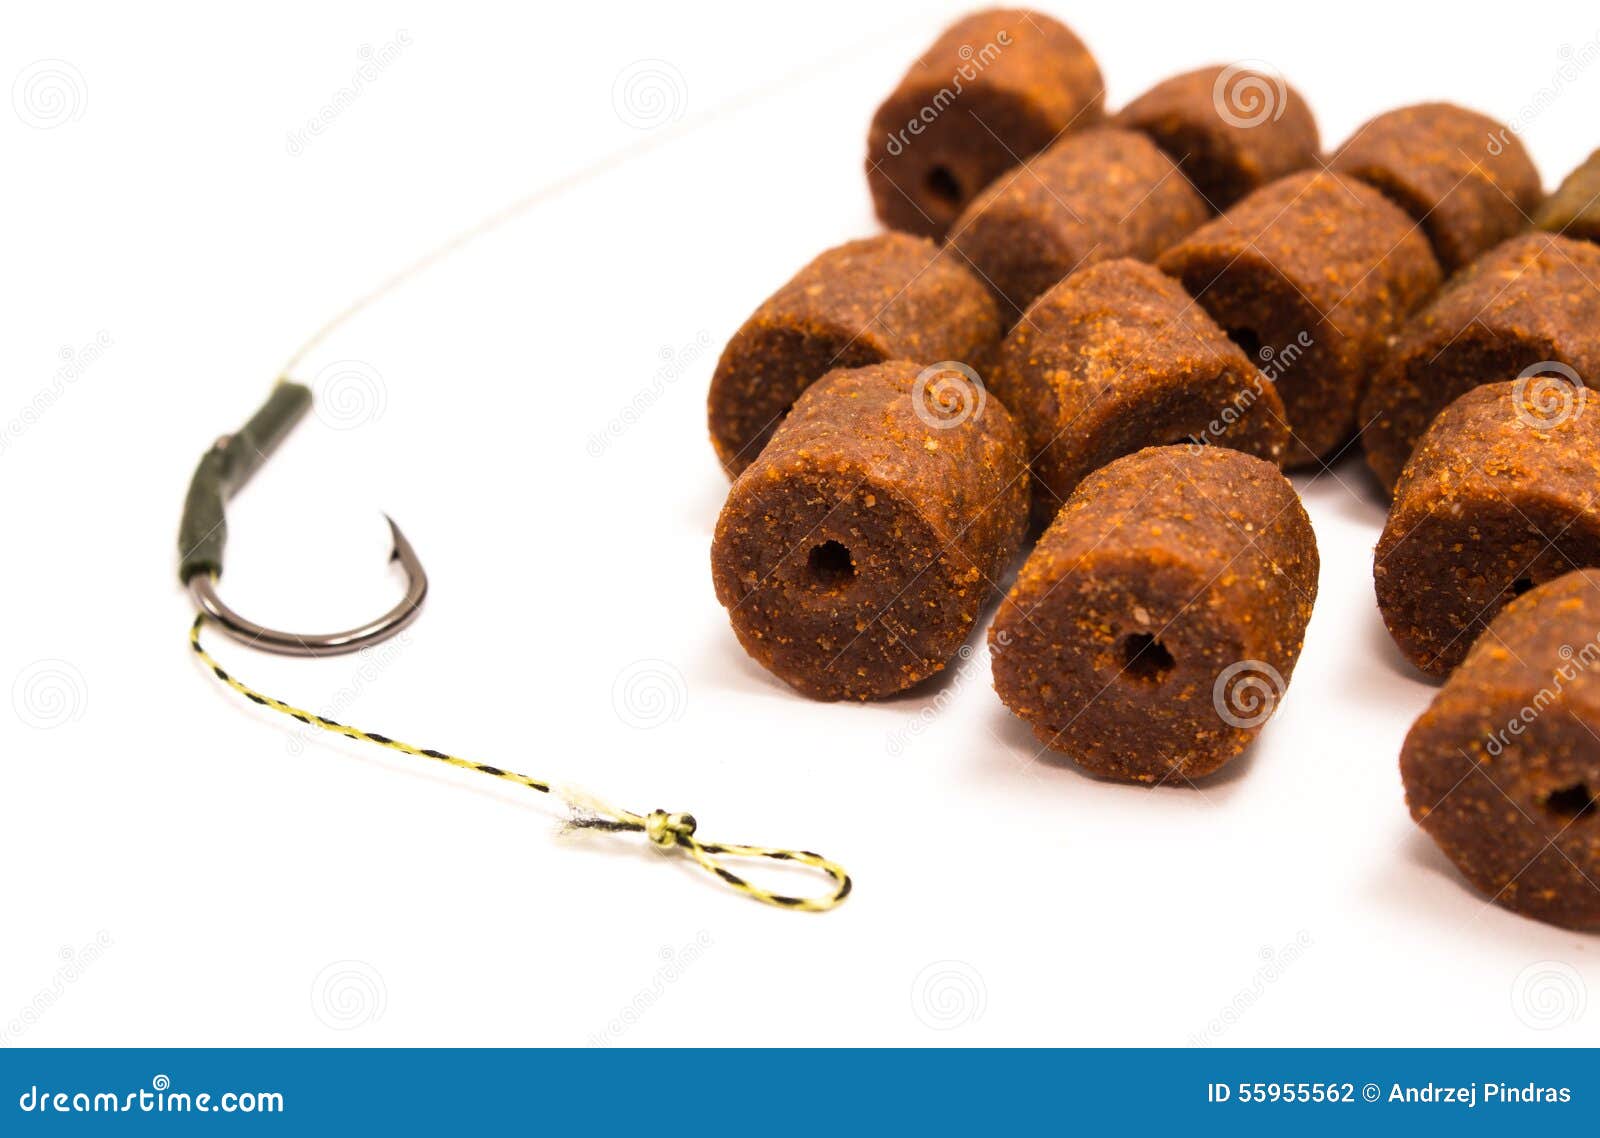 Pellet - Carp Fishing Bait and Accessories Stock Photo - Image of eggs,  round: 55955562